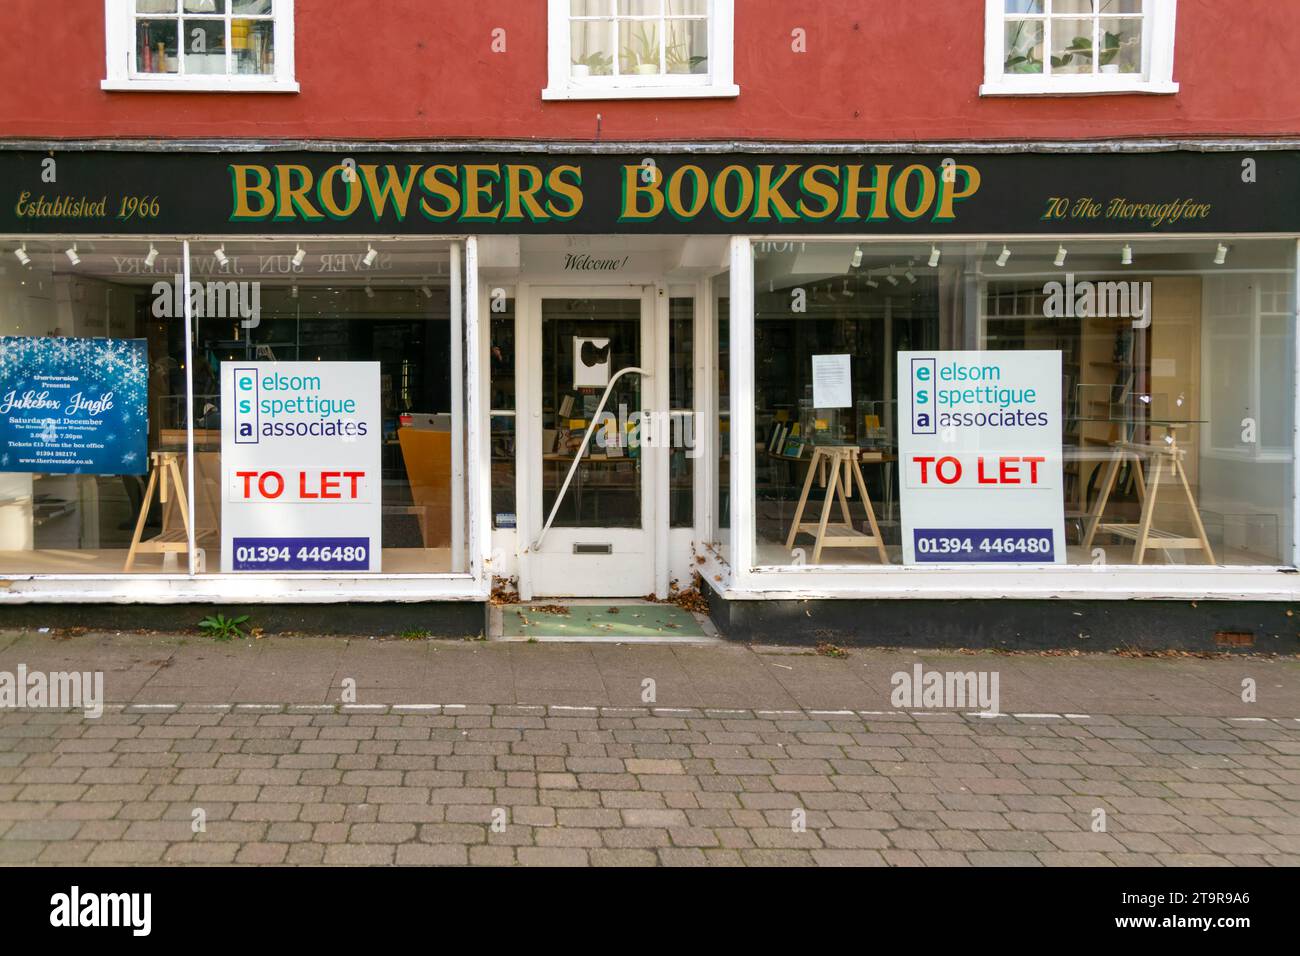 Browsers bookshop closed and to let, Elsom Spettigue Associates, Woodbridge, Suffolk, England, UK Stock Photo